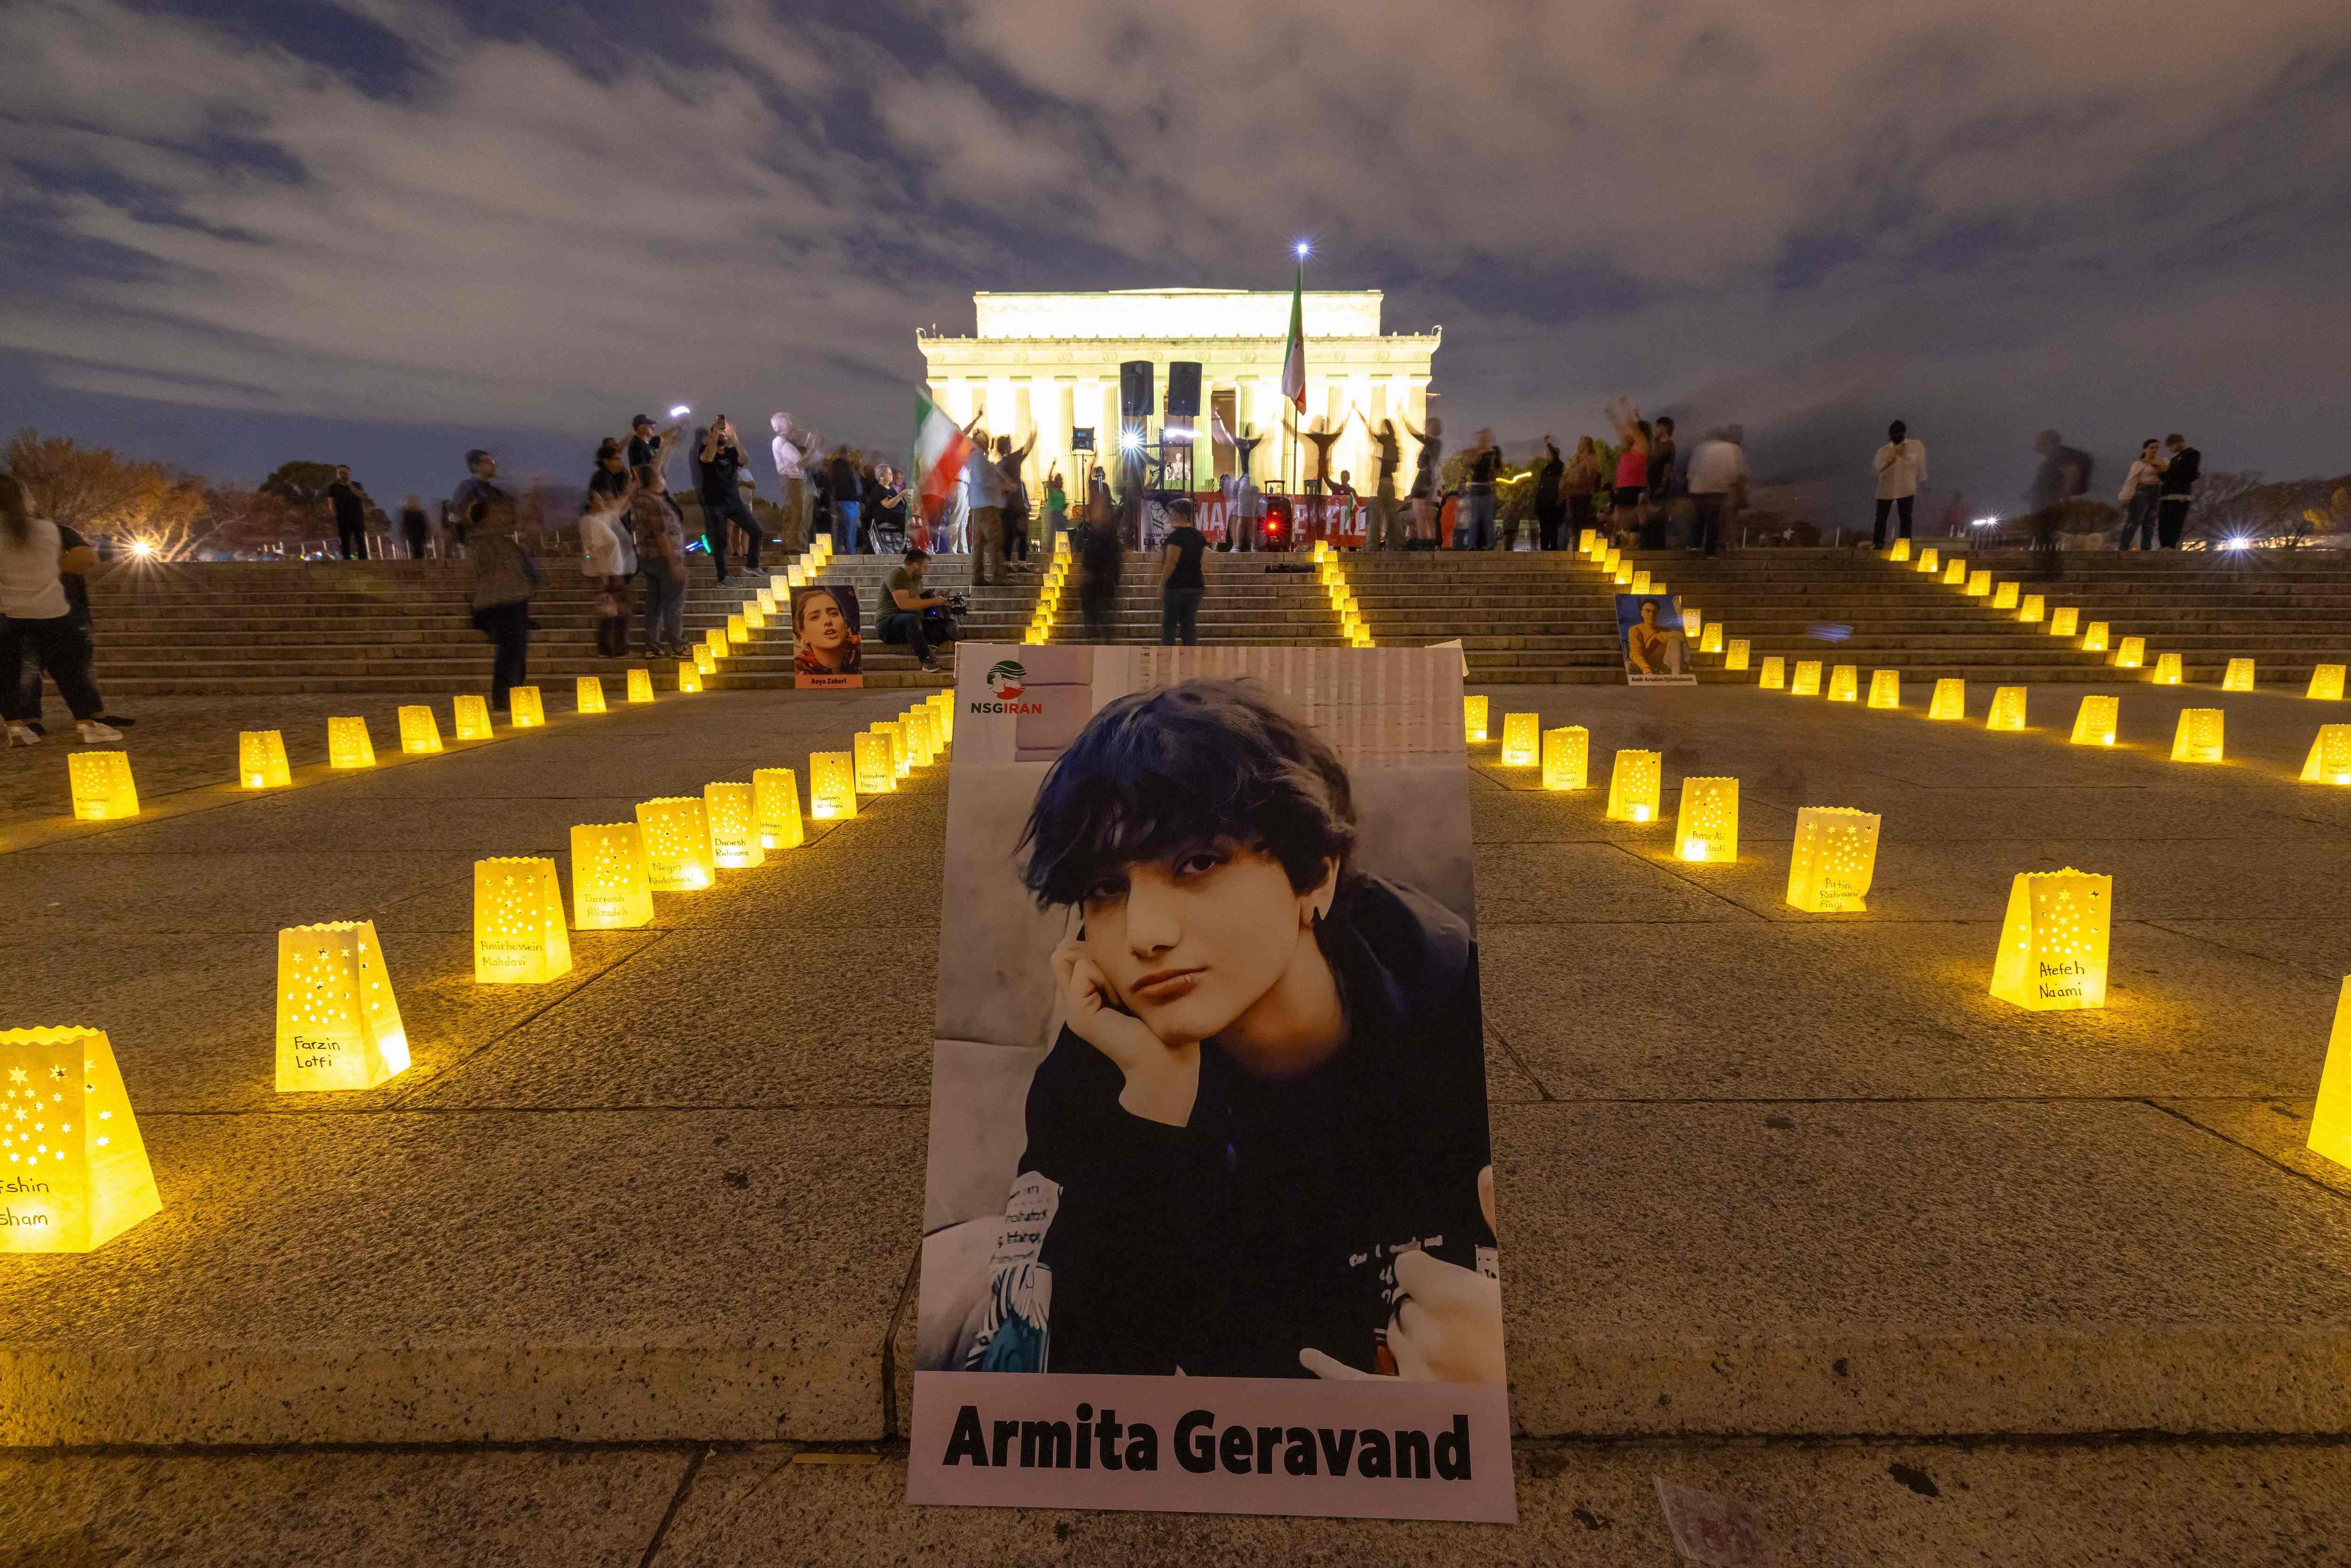 A photo of Armita Geravand,  a 16-year-old Iranian student who died after falling into a coma following an encounter with authorities in Iran,  is displayed in front of the Lincoln Memorial in Washington, DC, October 28, 2023.